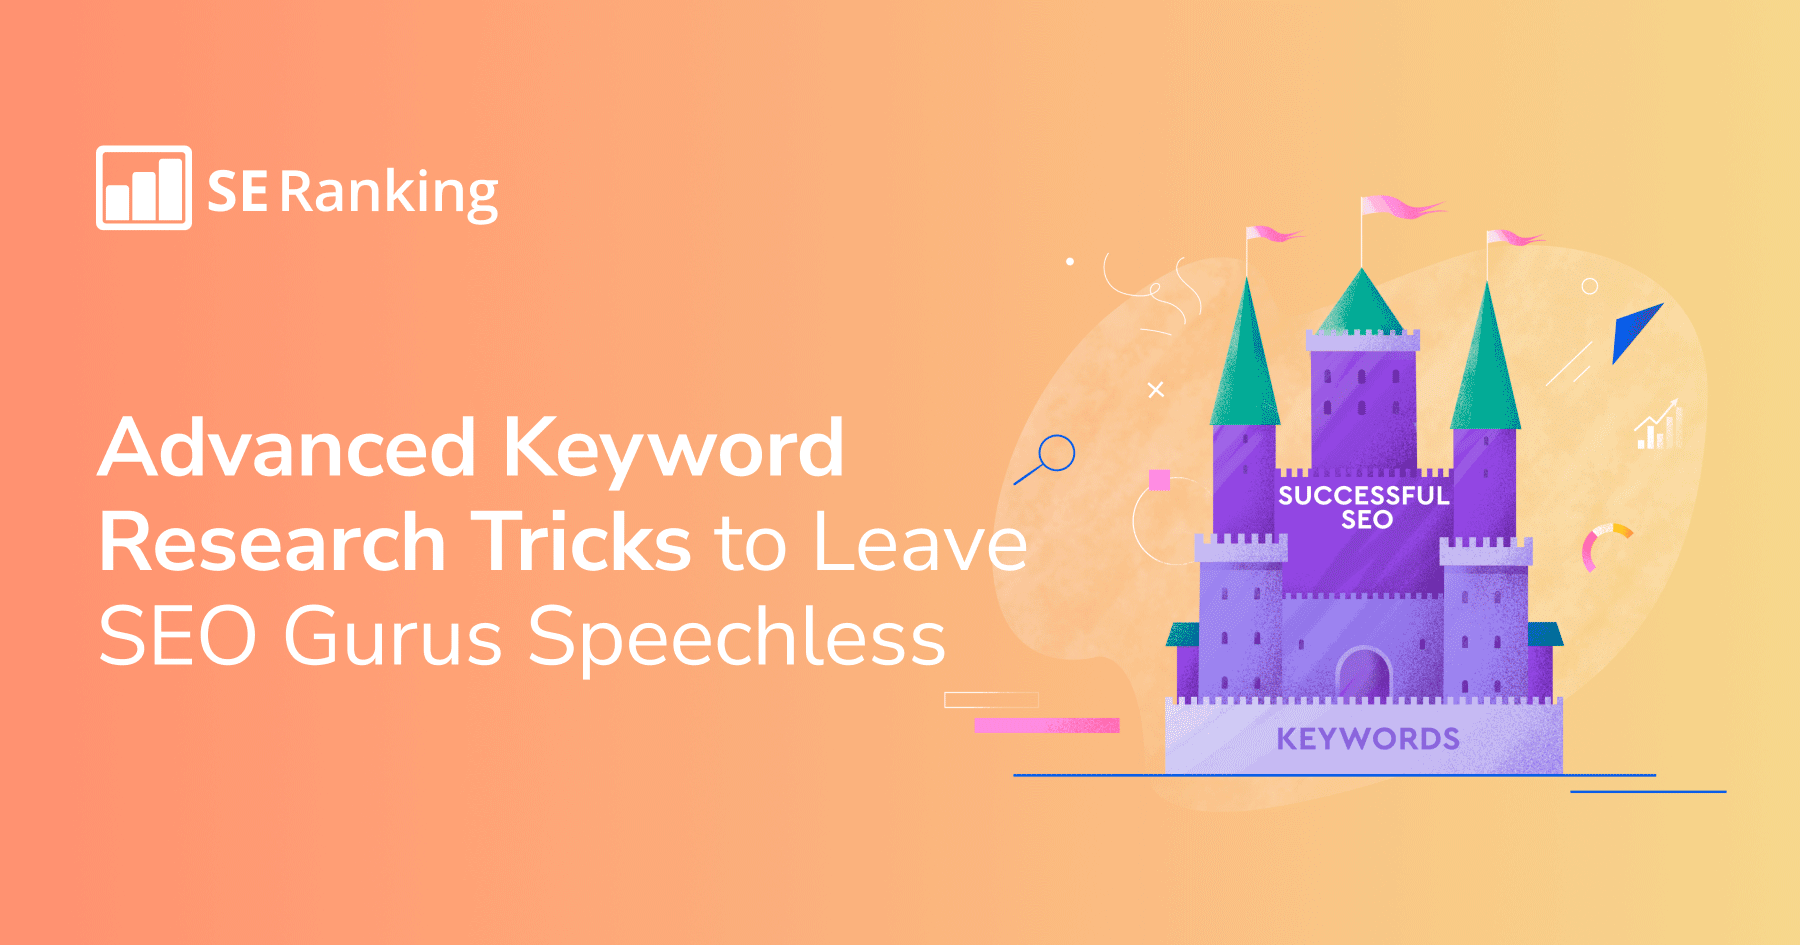 6 Advanced Keyword Research Strategies for SEO Success